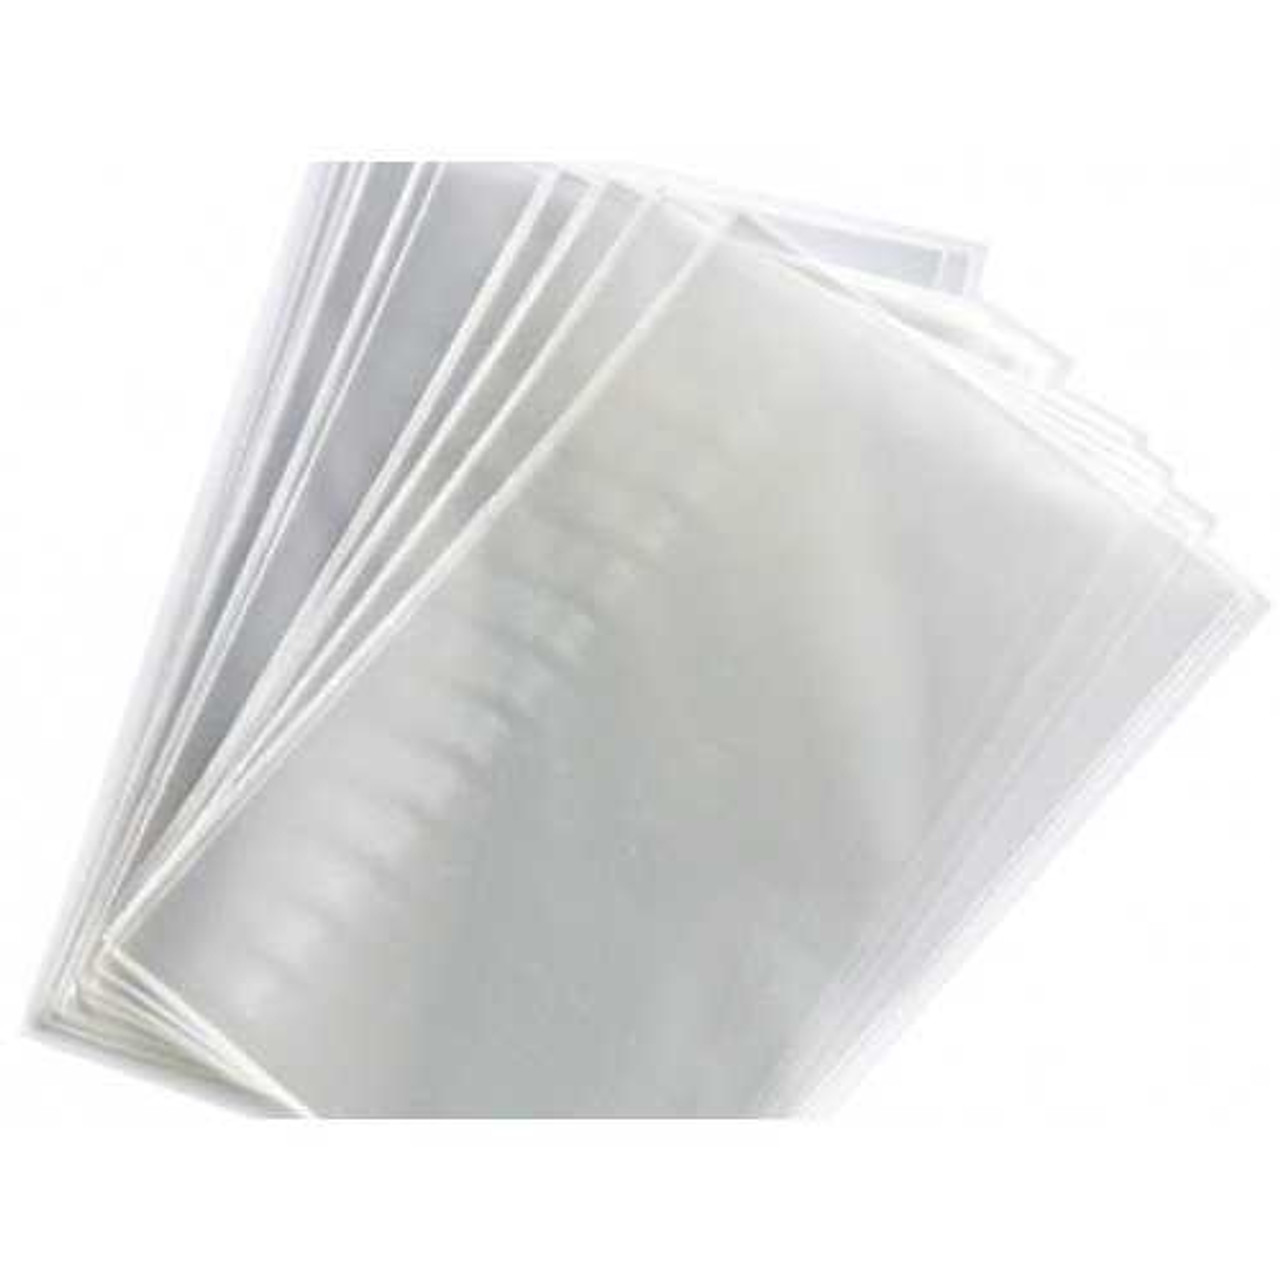 Amazon.com: ULINE 100 Clear 12 x 18 Poly Bags Plastic Lay Flat Open TOP  Packing ULINE Best 1 MIL : Health & Household